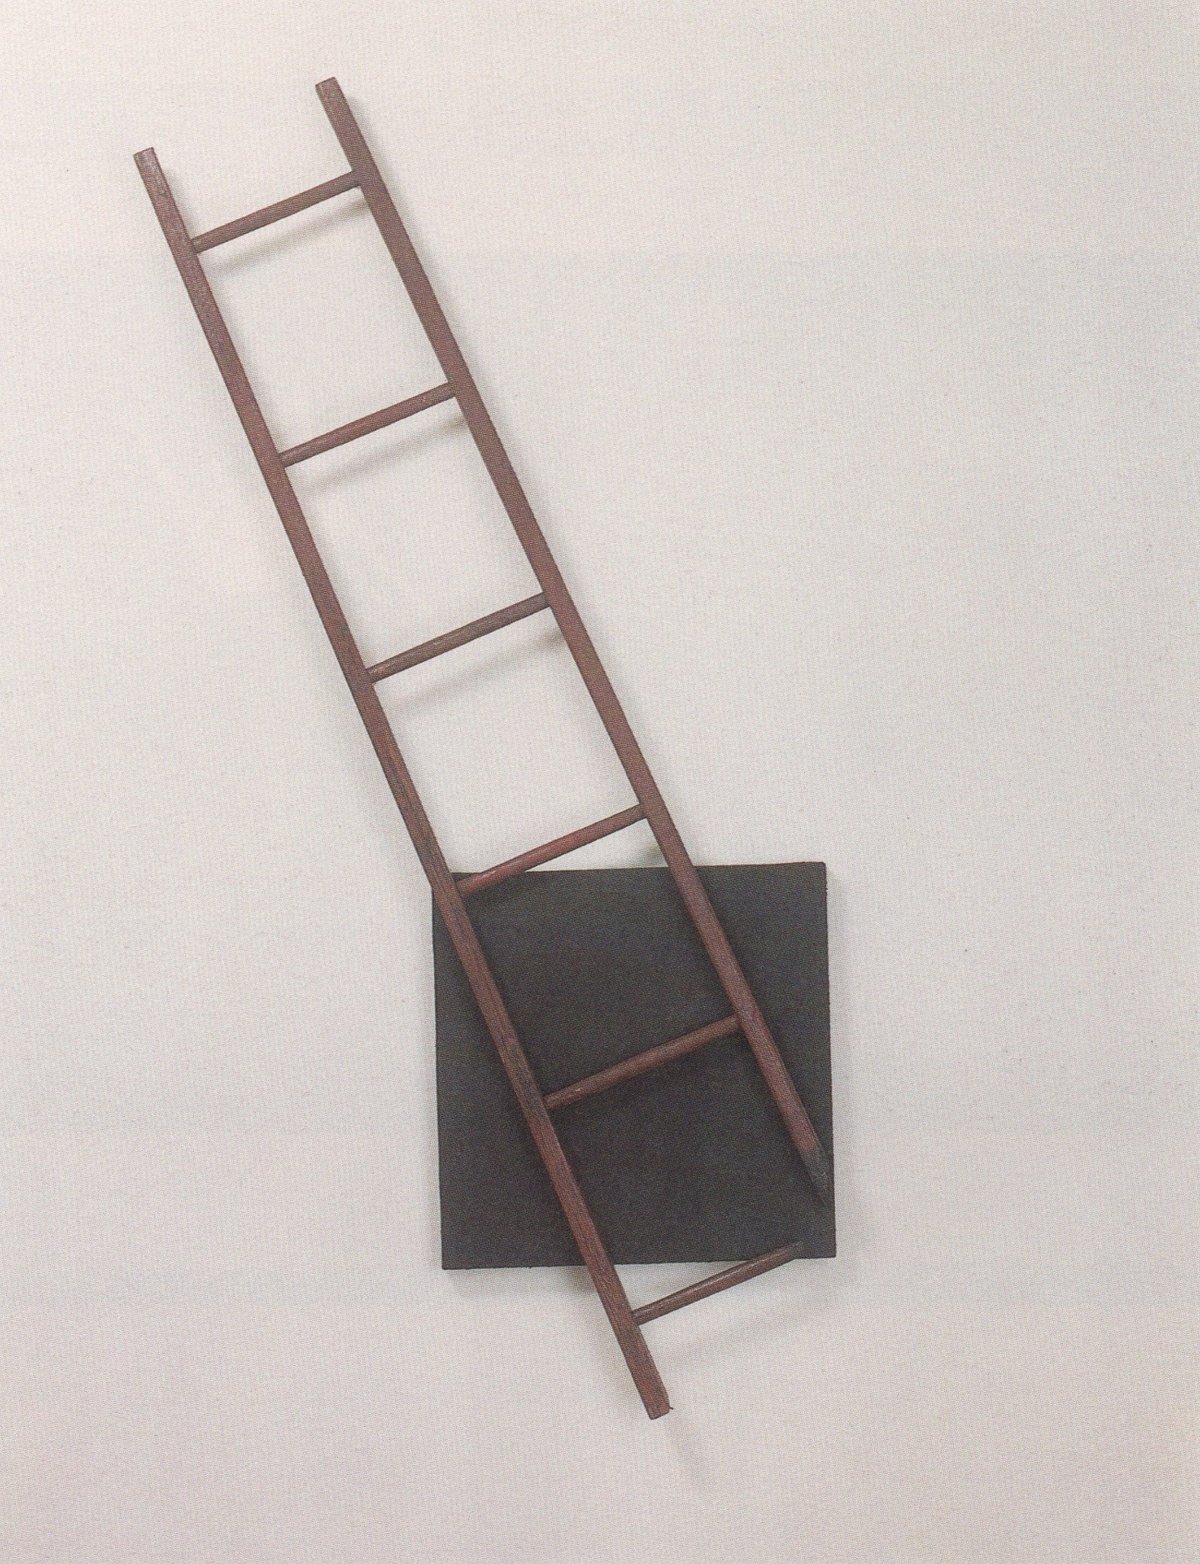 eric snell, “joanna&#x27;s ladder” (1991), ash of ladder on canvas, 240 x 120 cm